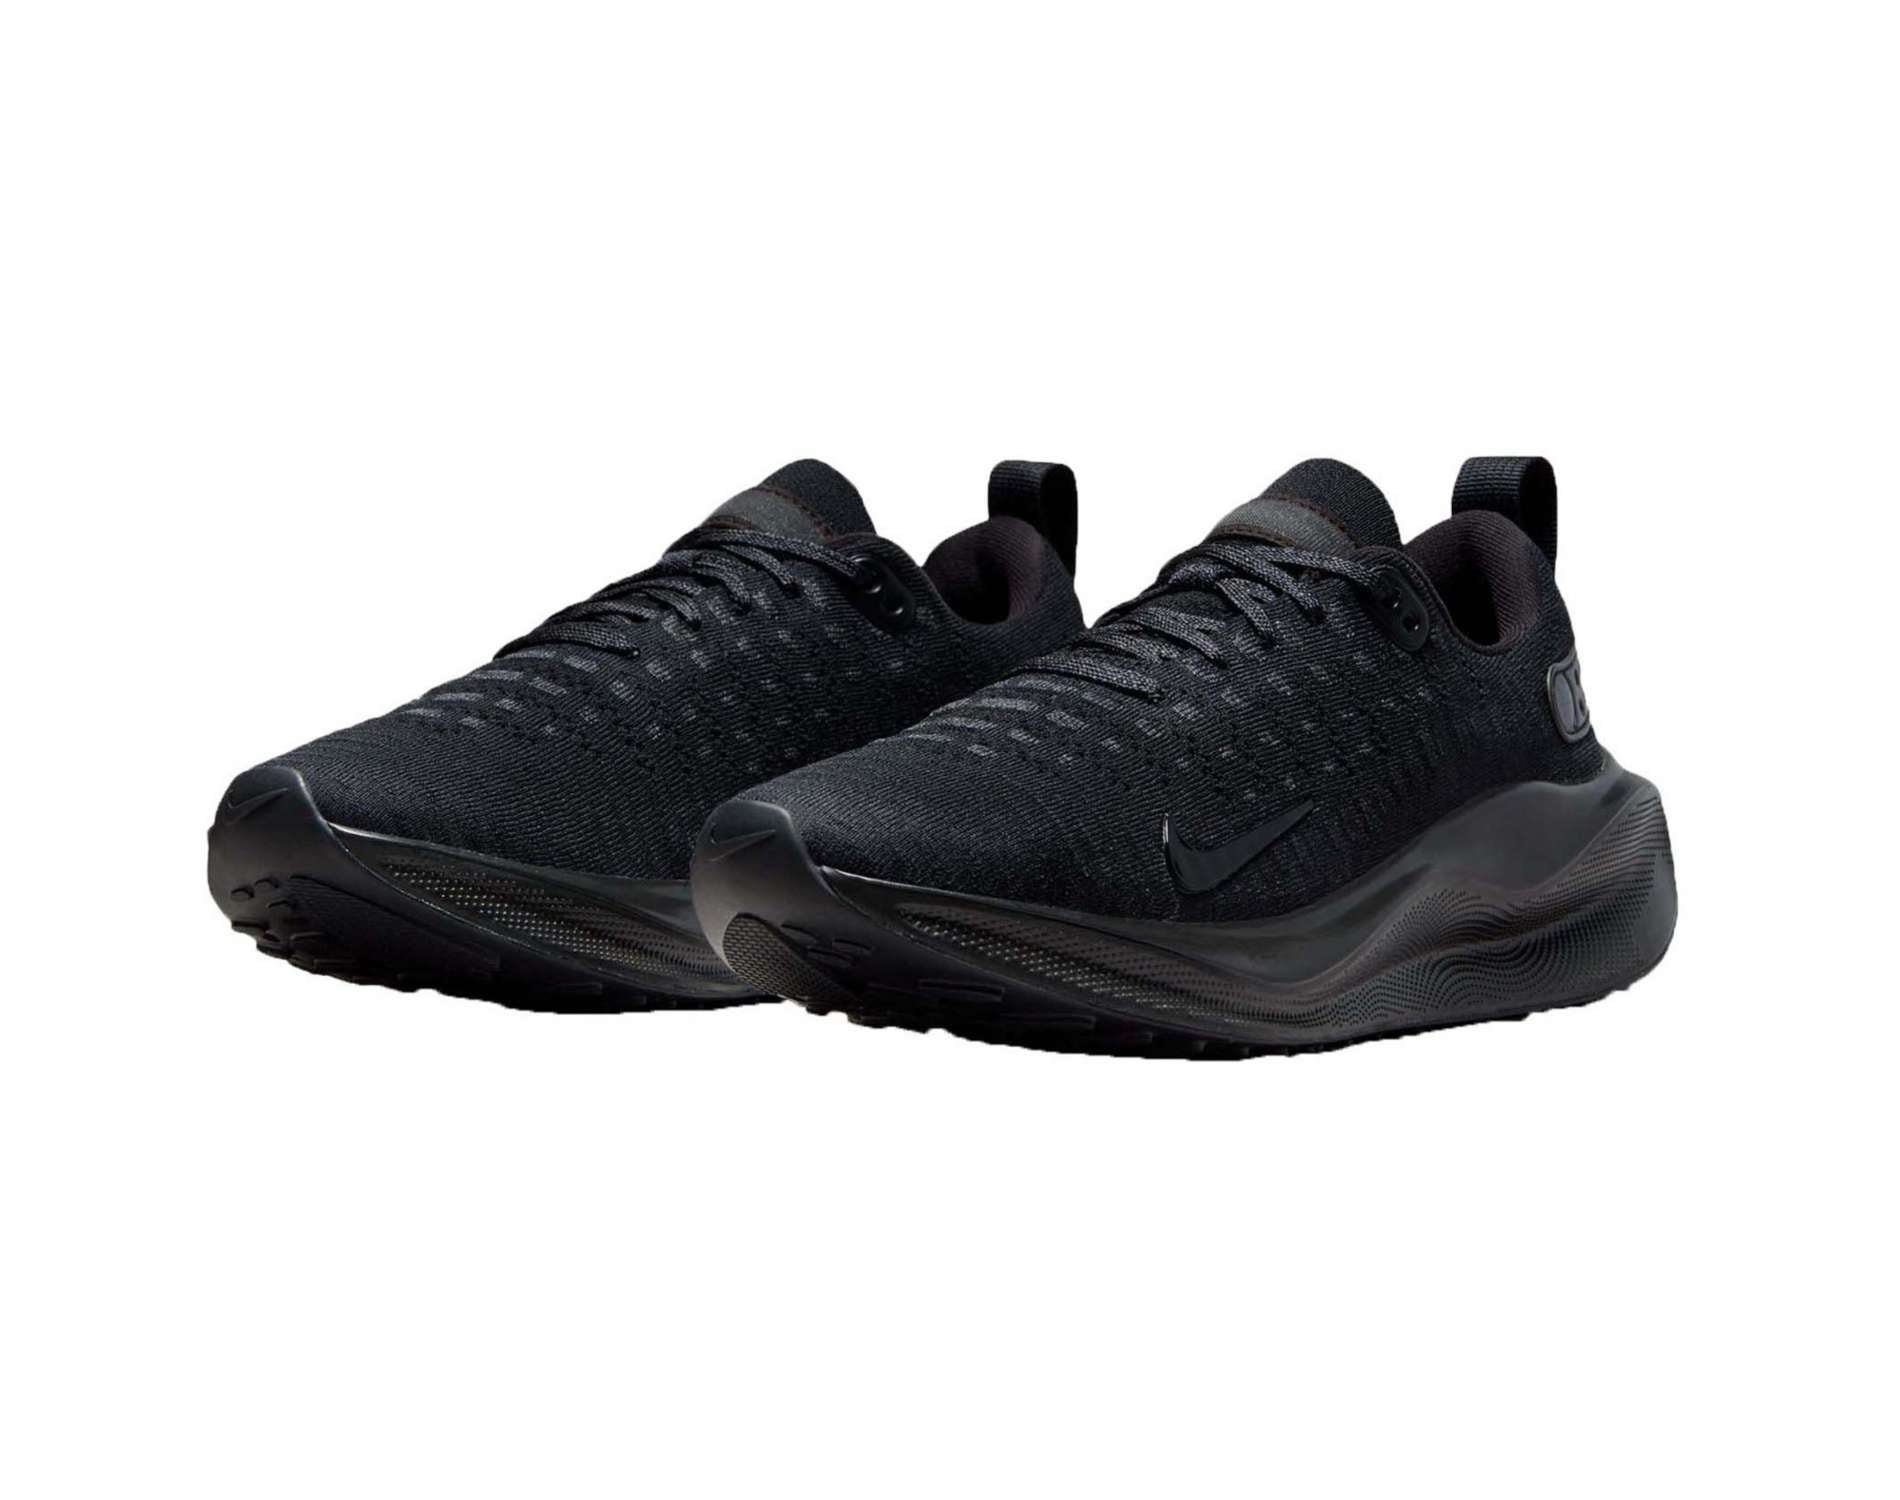 Nike React Infinity Run Flyknit 4 Womens running shoe in b width in black black anthracite colour